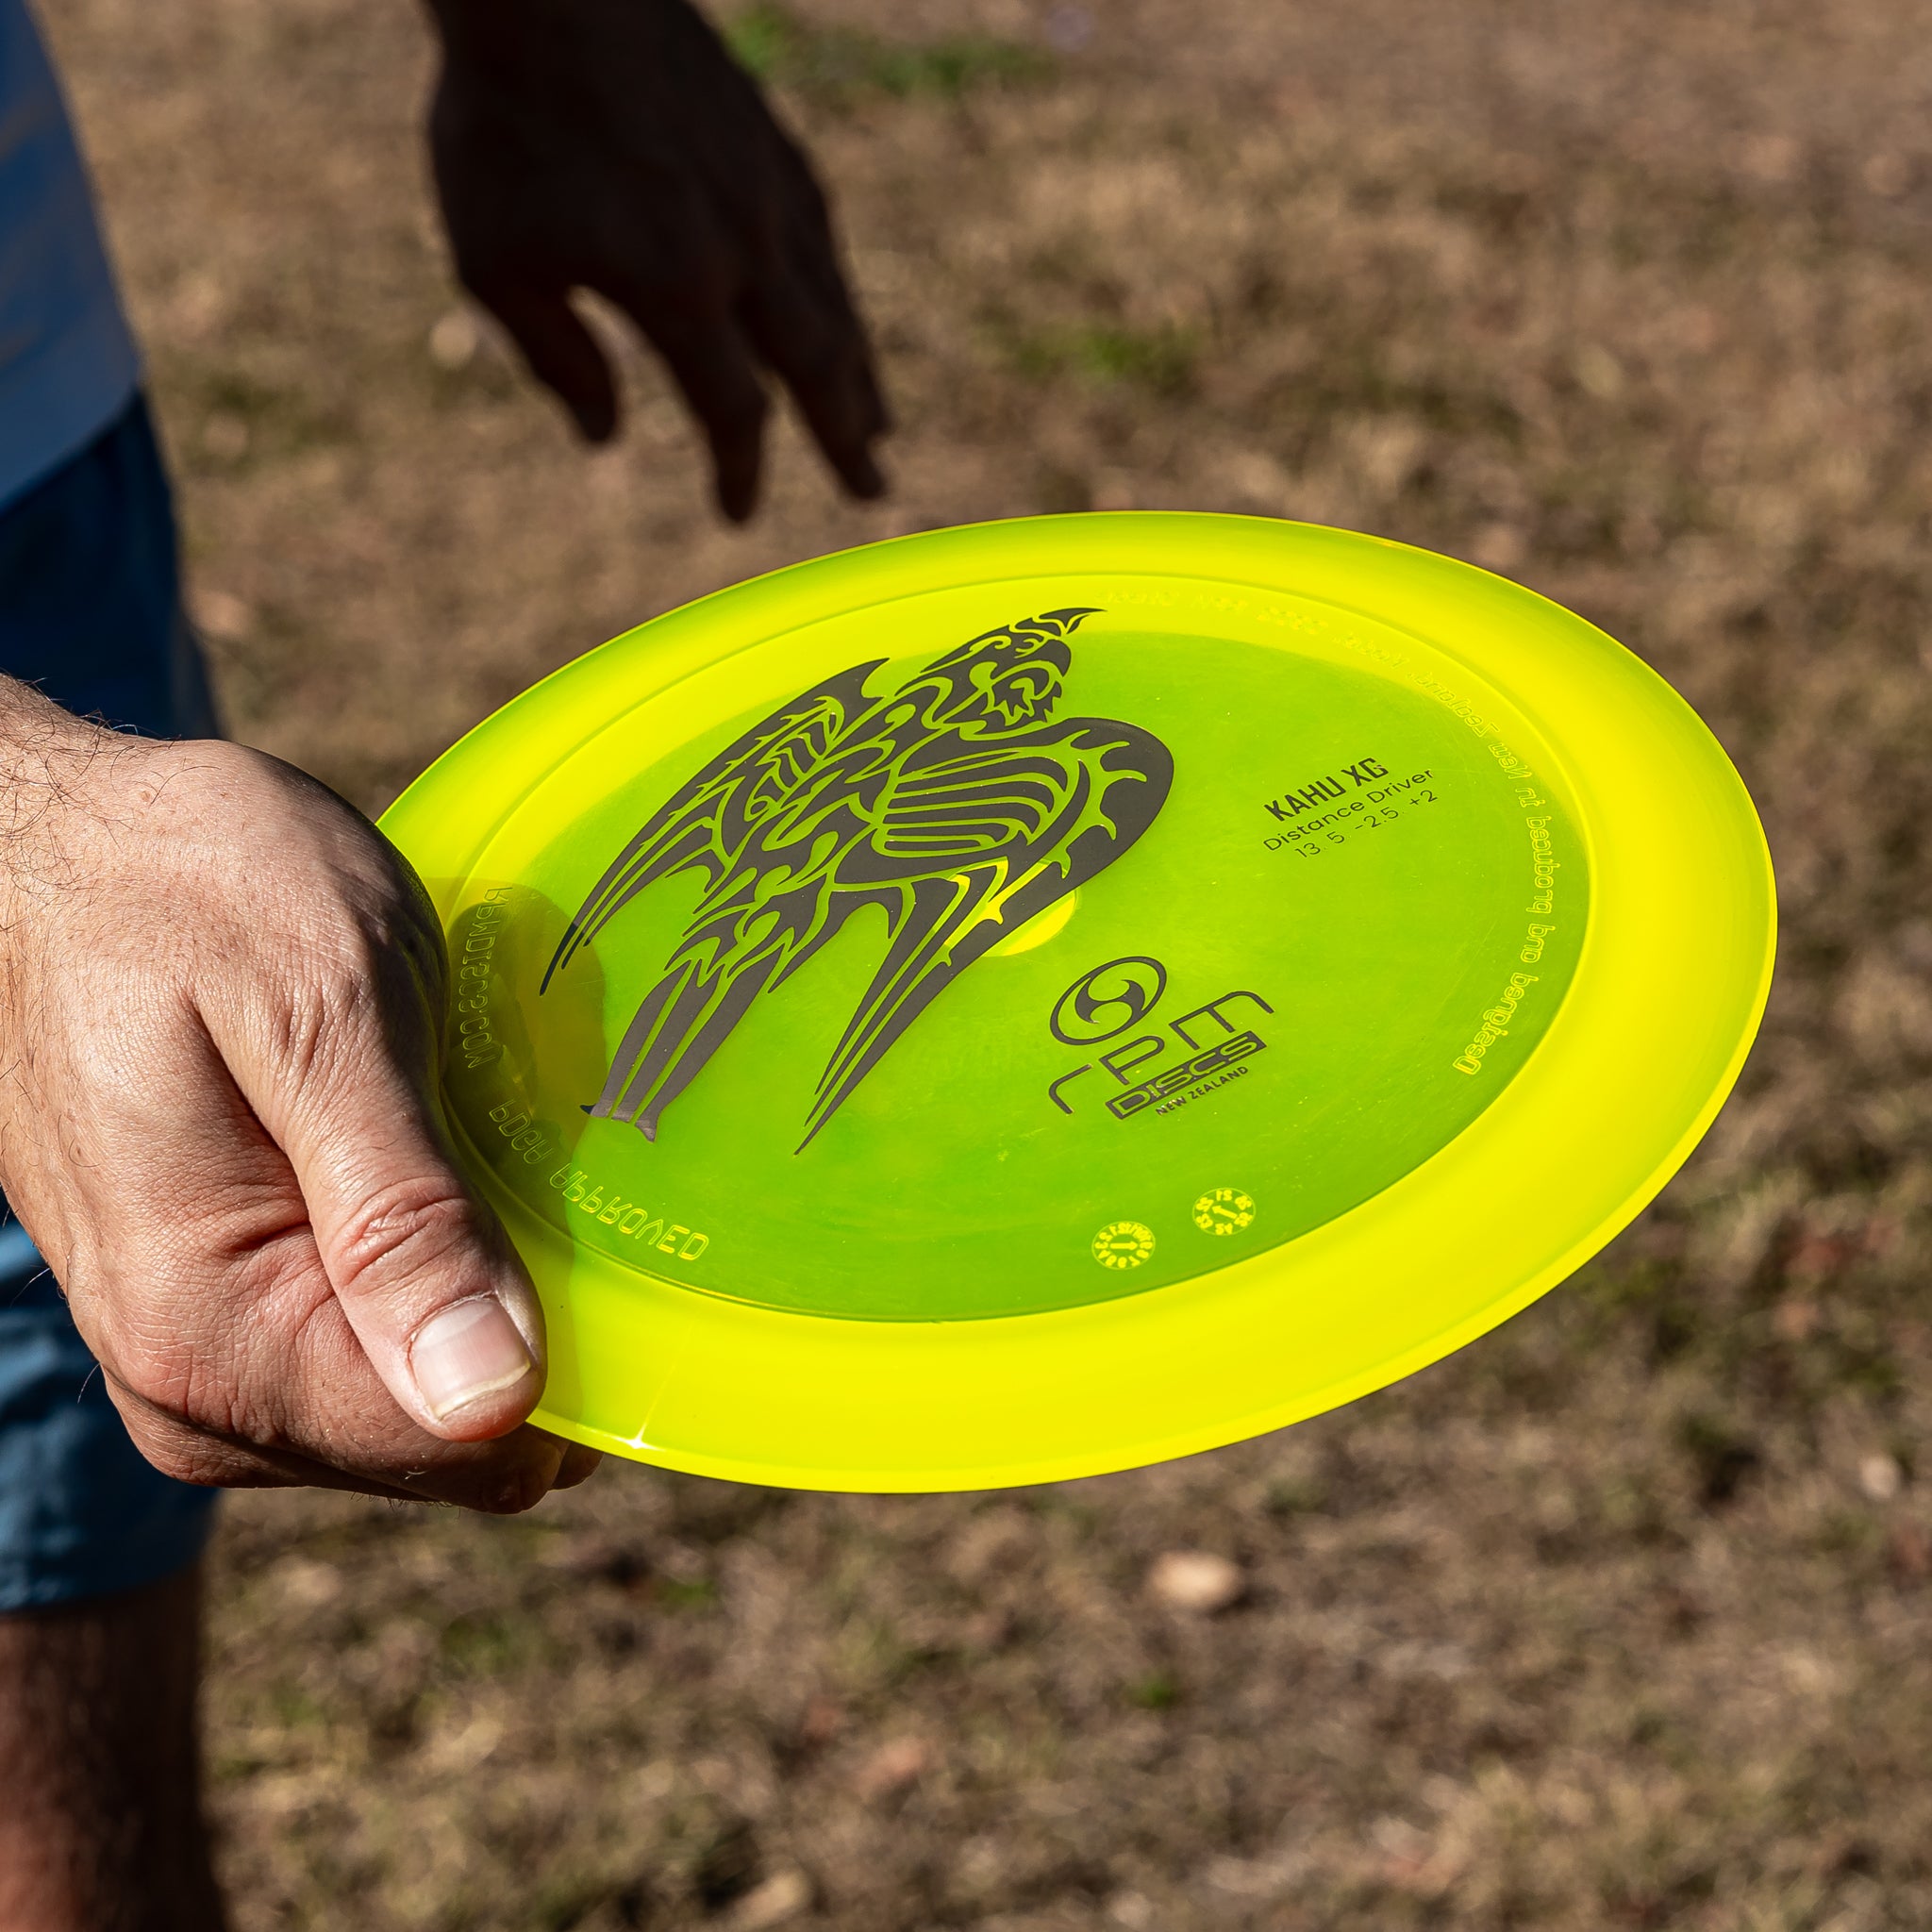 RPM Discs Kahu XG in Cosmic being held ready to throw